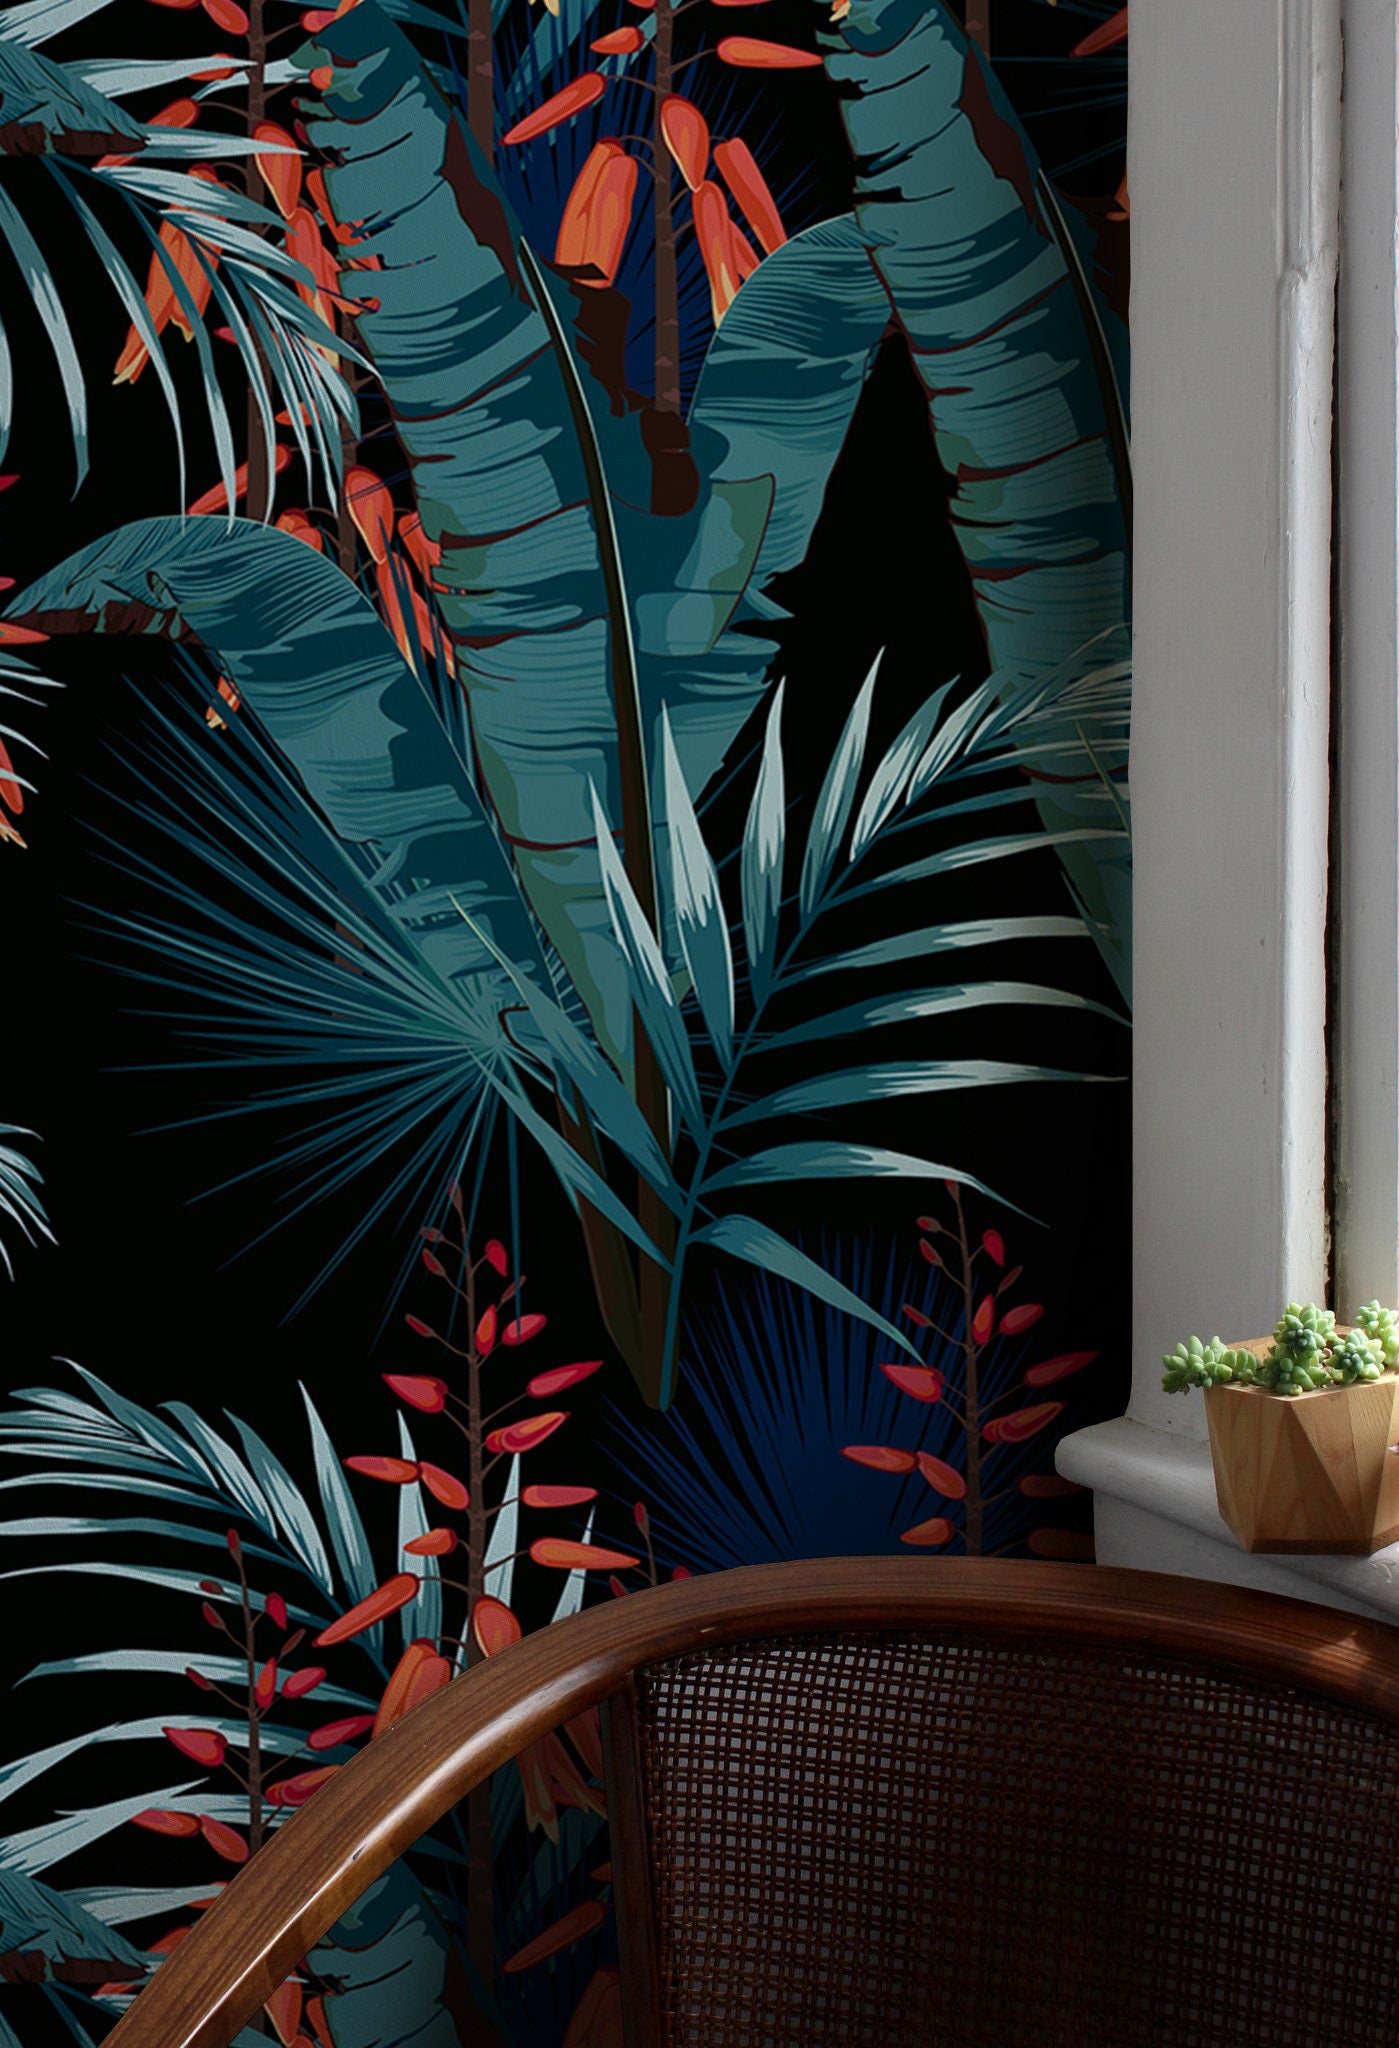 Wallpaper Peel and Stick Wallpaper Removable Wallpaper Home Decor Wall Art Wall Decor Room Decor / Tropical Palm Leaves Wallpaper - B143